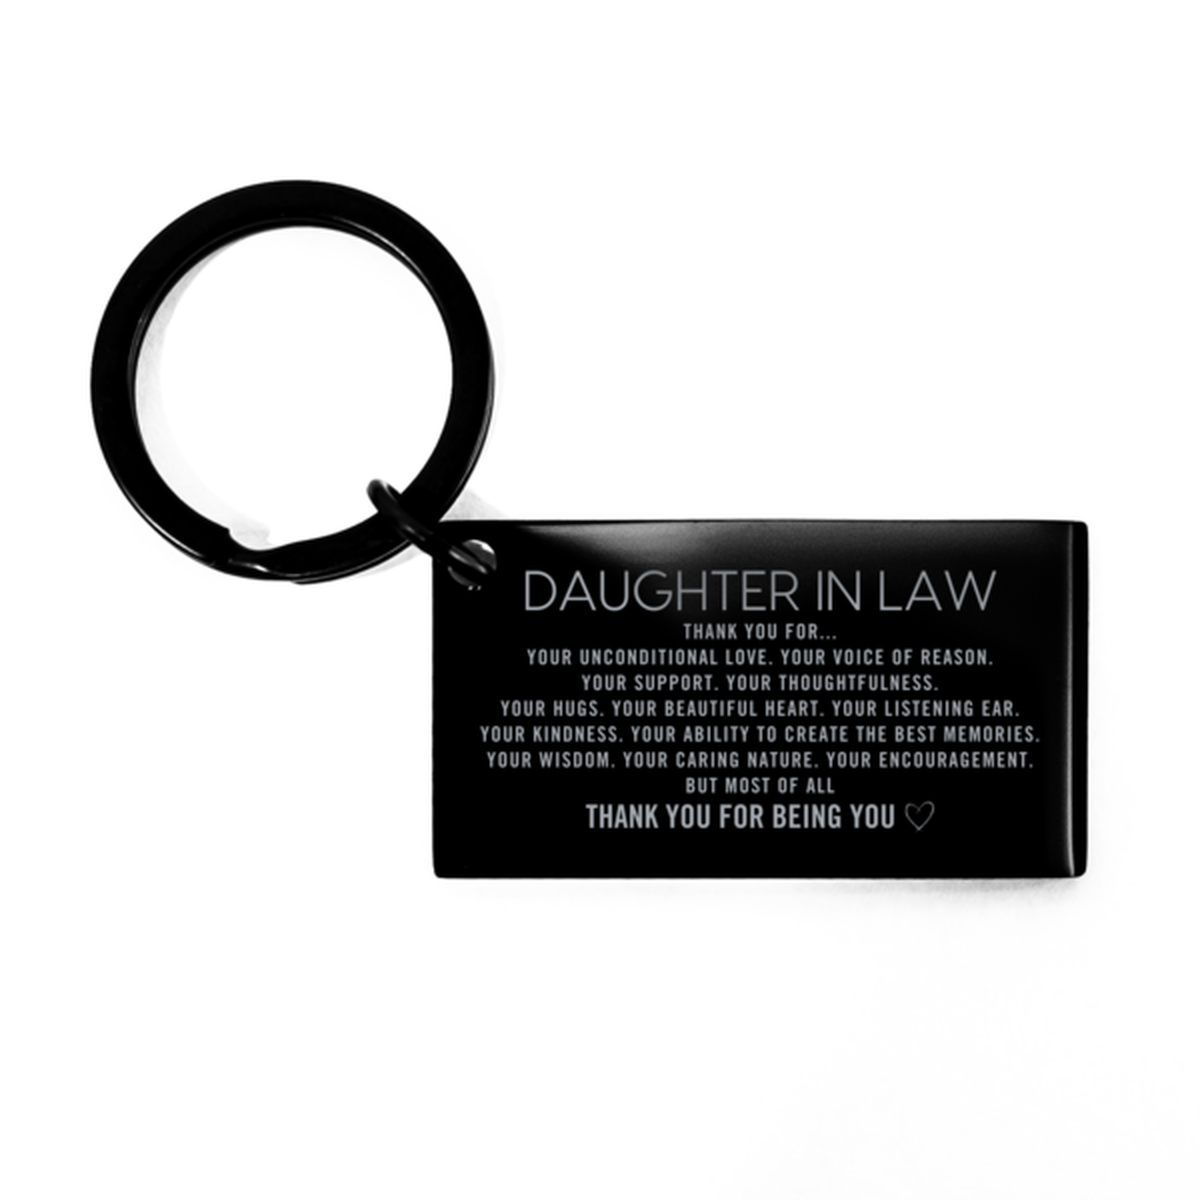 Daughter In Law Keychain Custom, Engraved Gifts For Daughter In Law Christmas Graduation Birthday Gifts for Men Women Daughter In Law Thank you for Your unconditional love